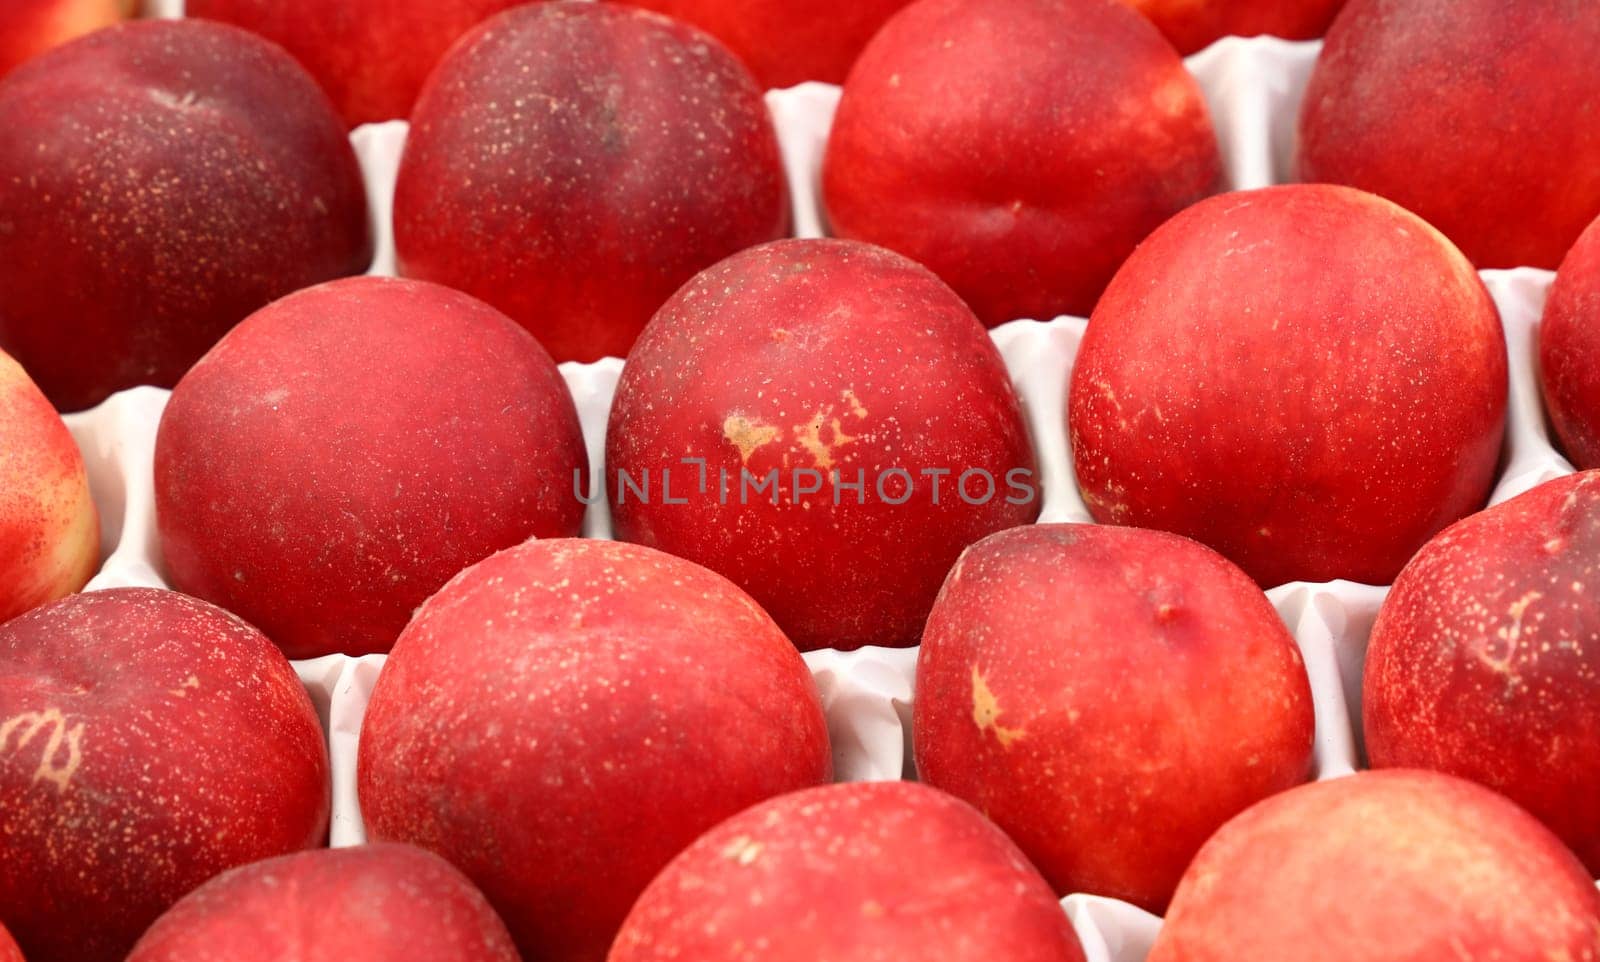 Close up fresh red nectarine peaches at retail display of farmer market, high angle view